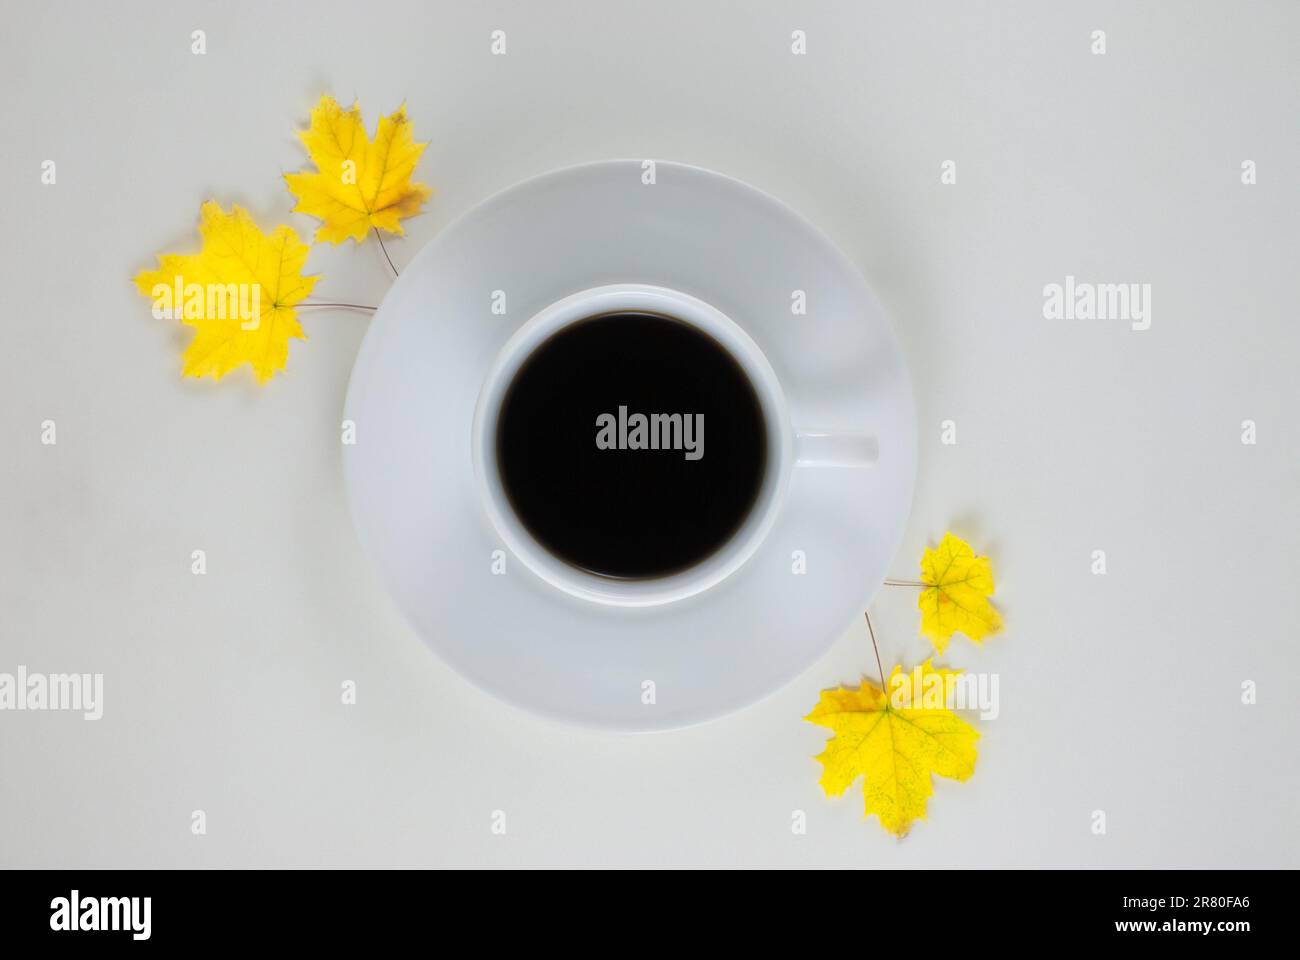 Coffee mug with autumn fall leaves on white background Stock Photo